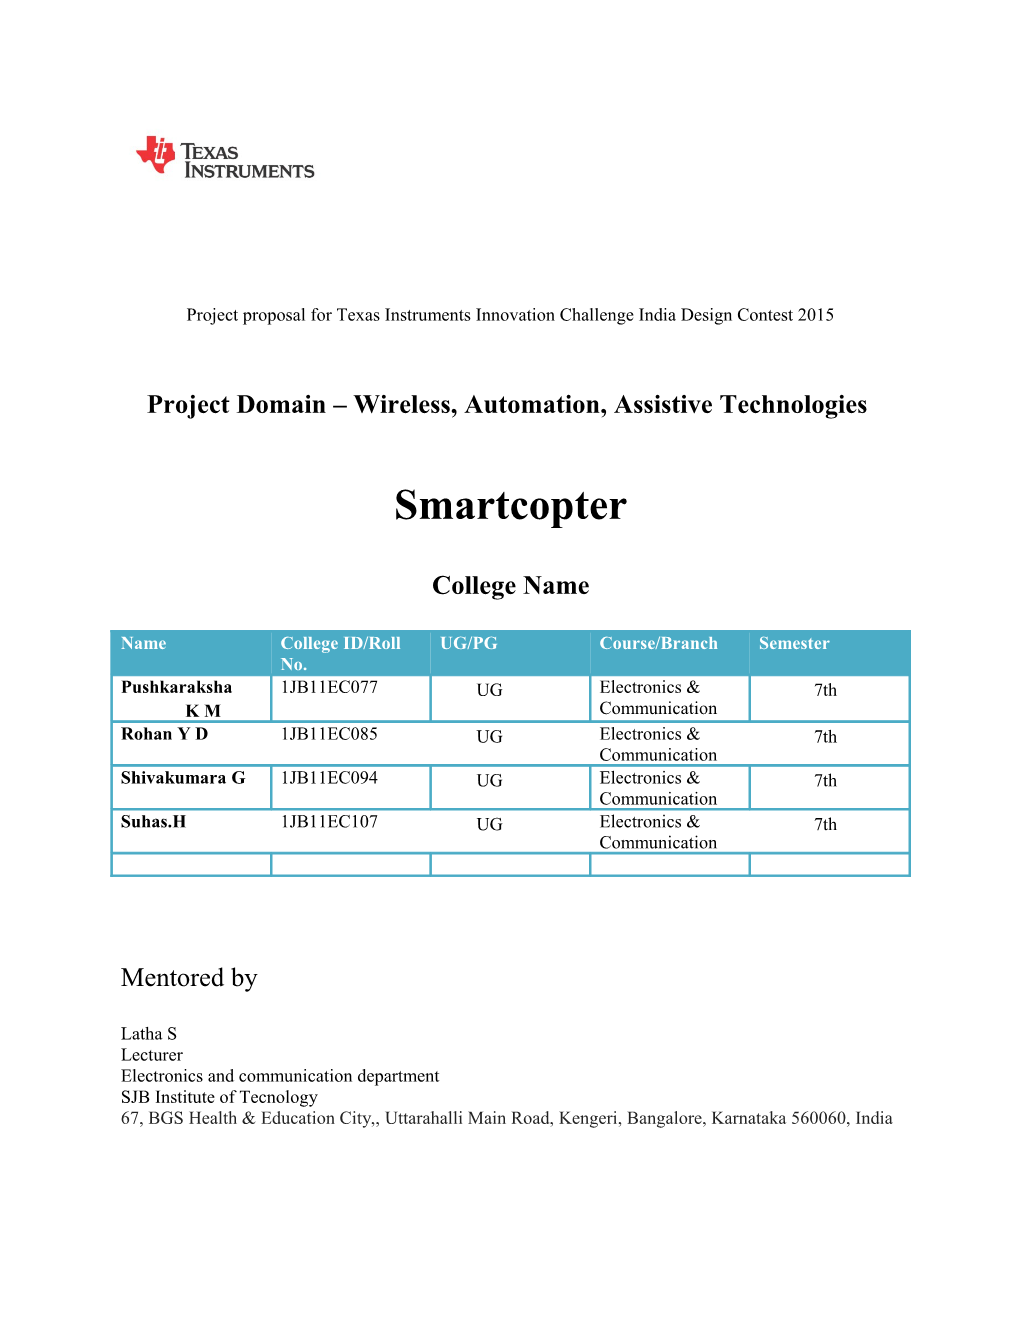 Project Proposal for Texas Instruments Innovation Challenge India Design Contest 2015